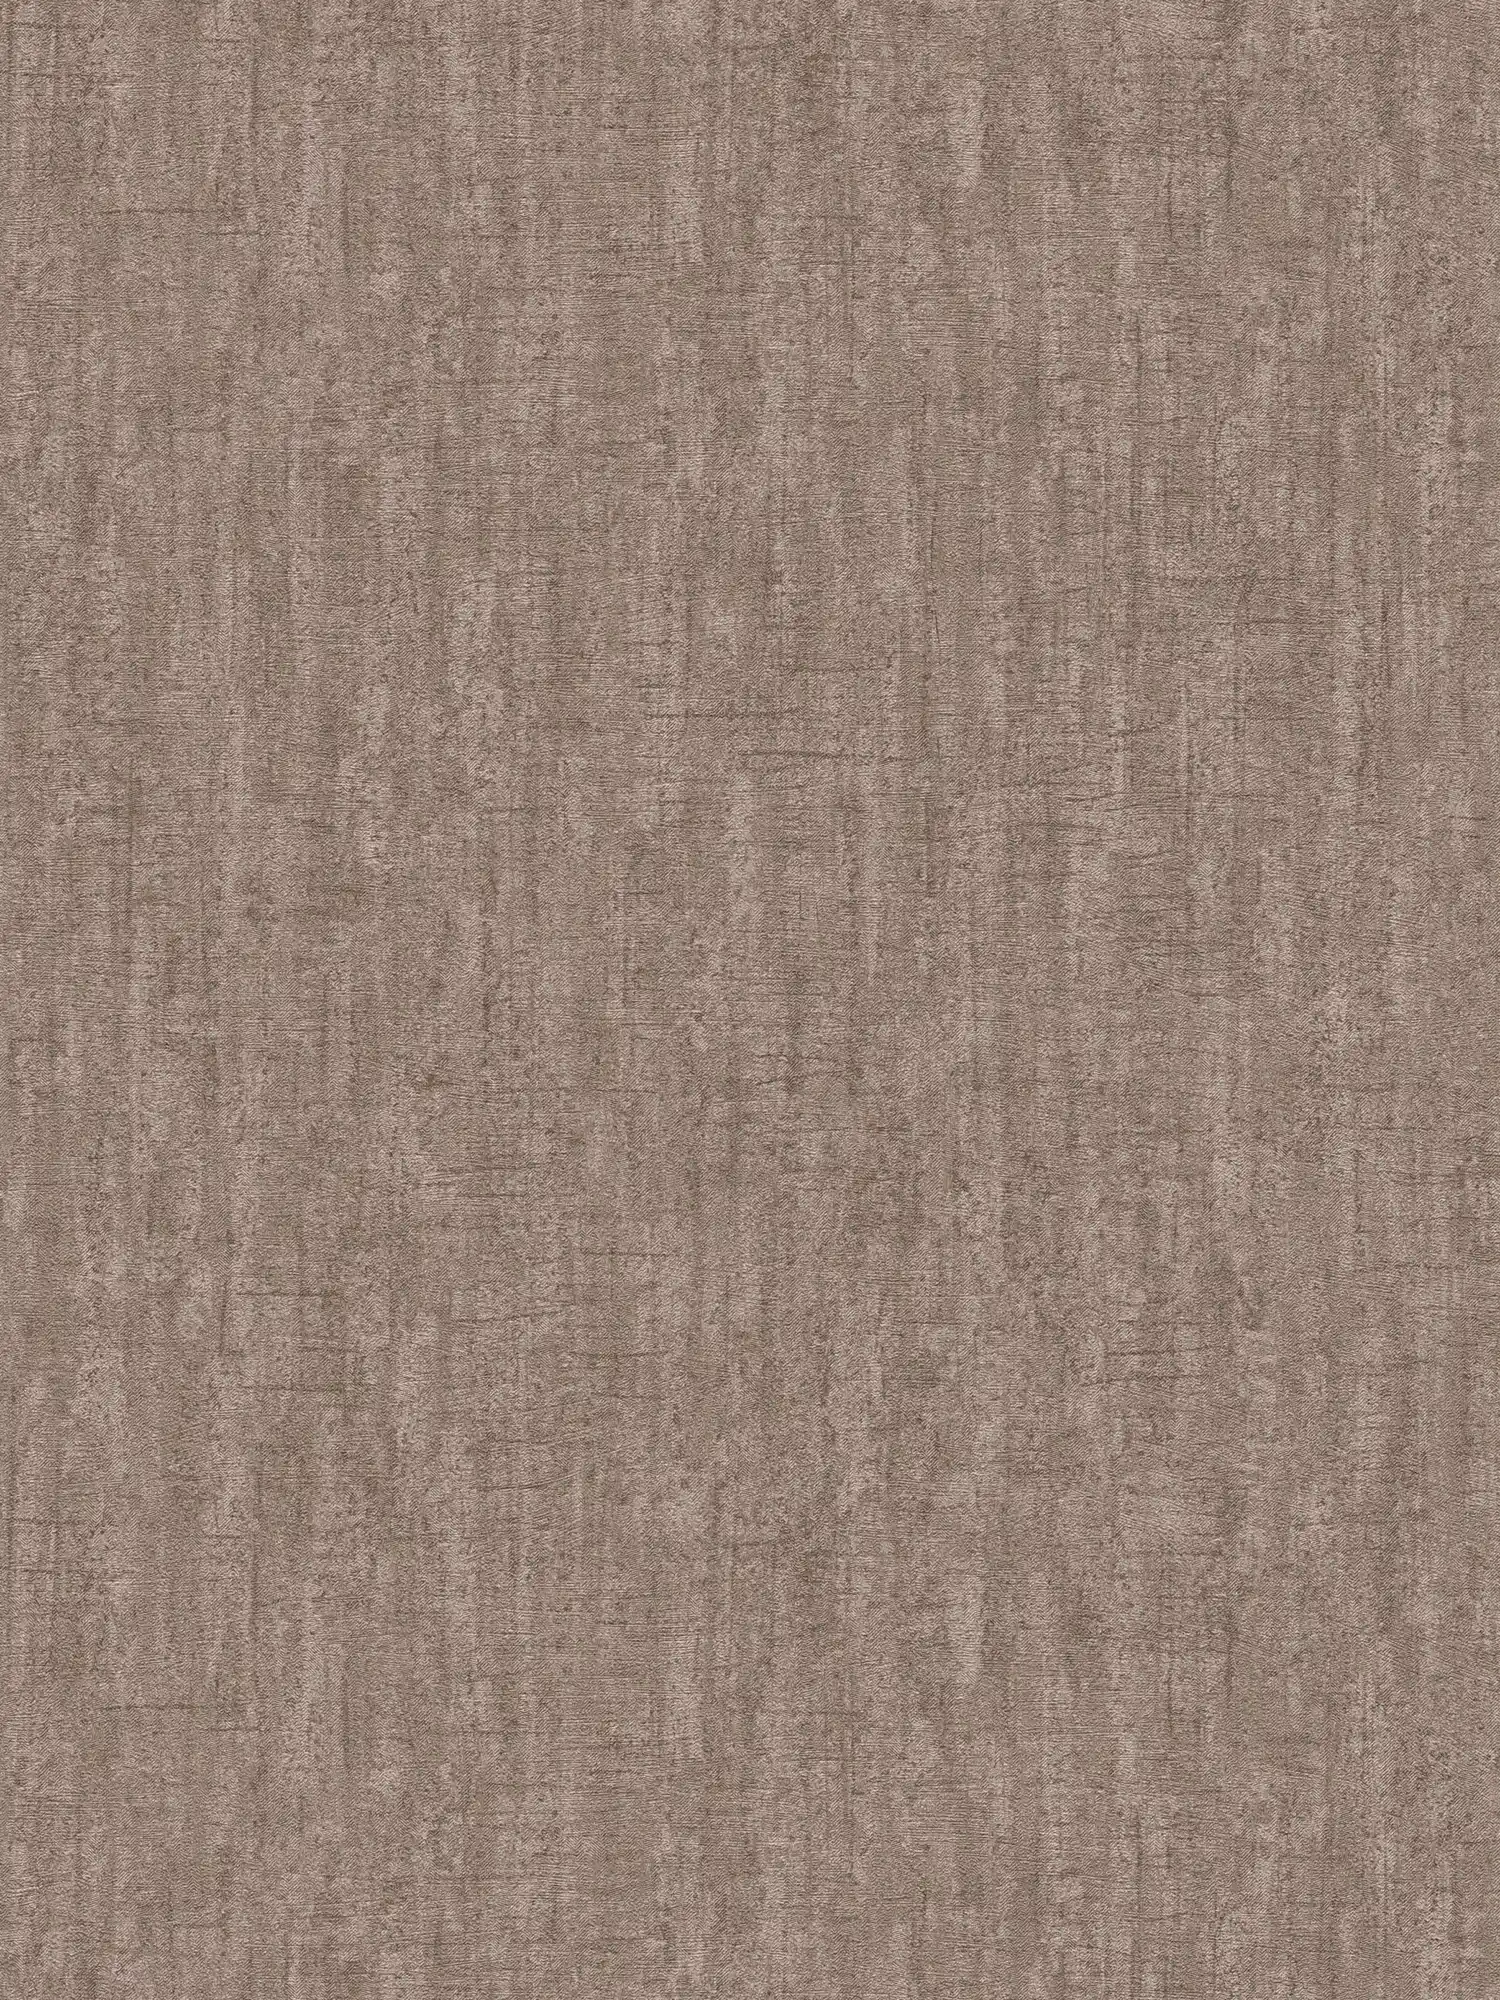 Plain non-woven wallpaper glossy with textured pattern - brown
